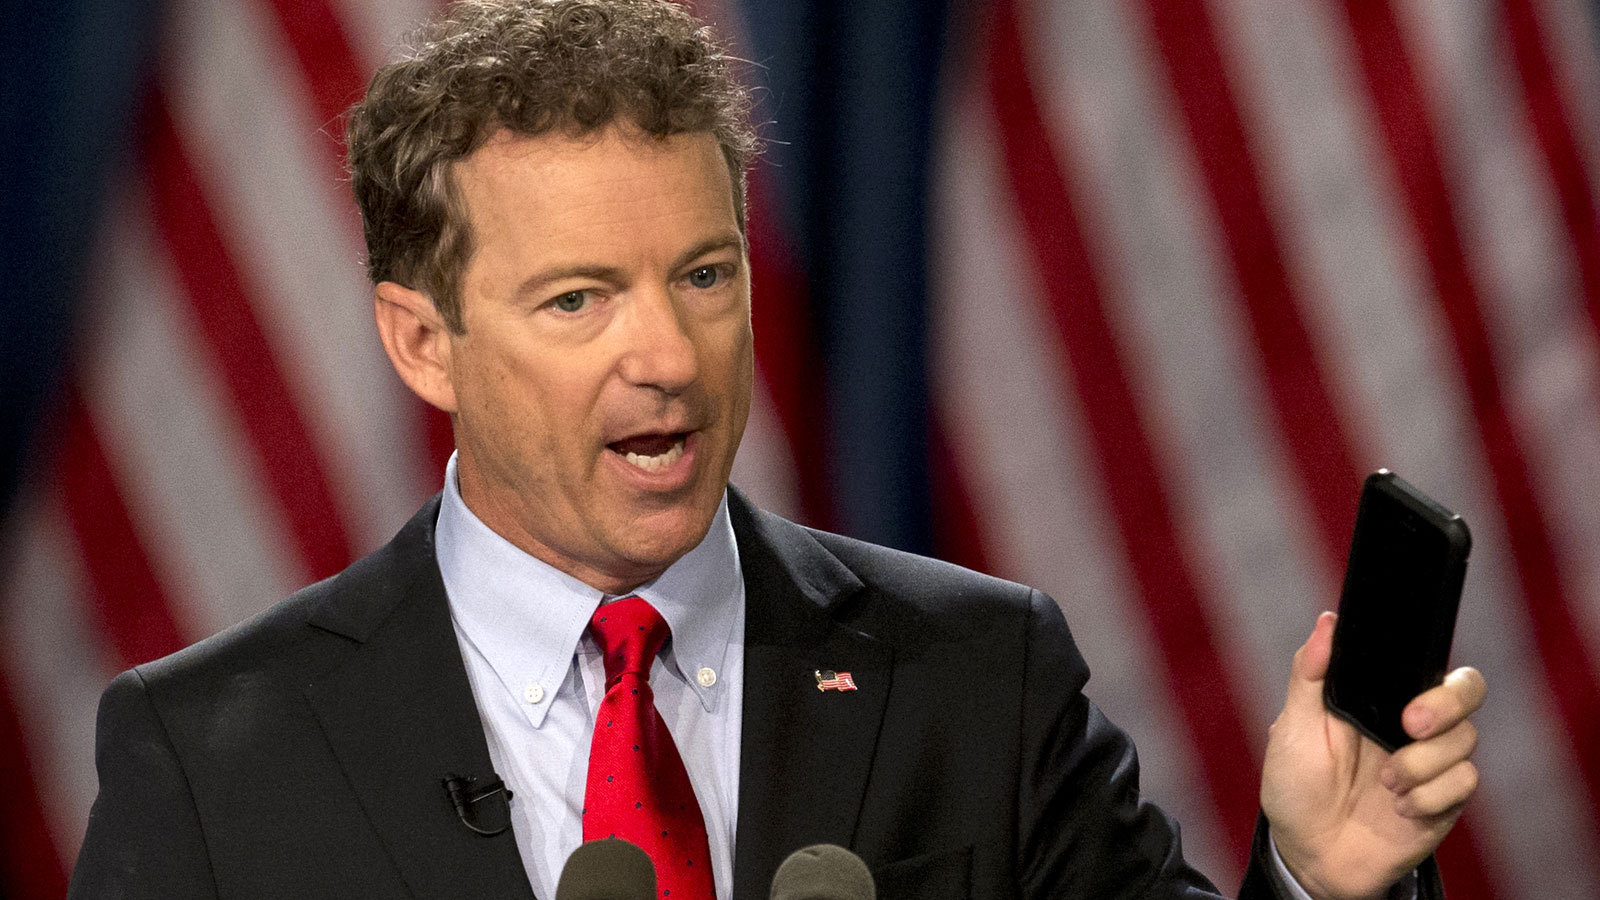 Rand Paul's 2016 entry speech makes his presidential challenges clear - LA Times